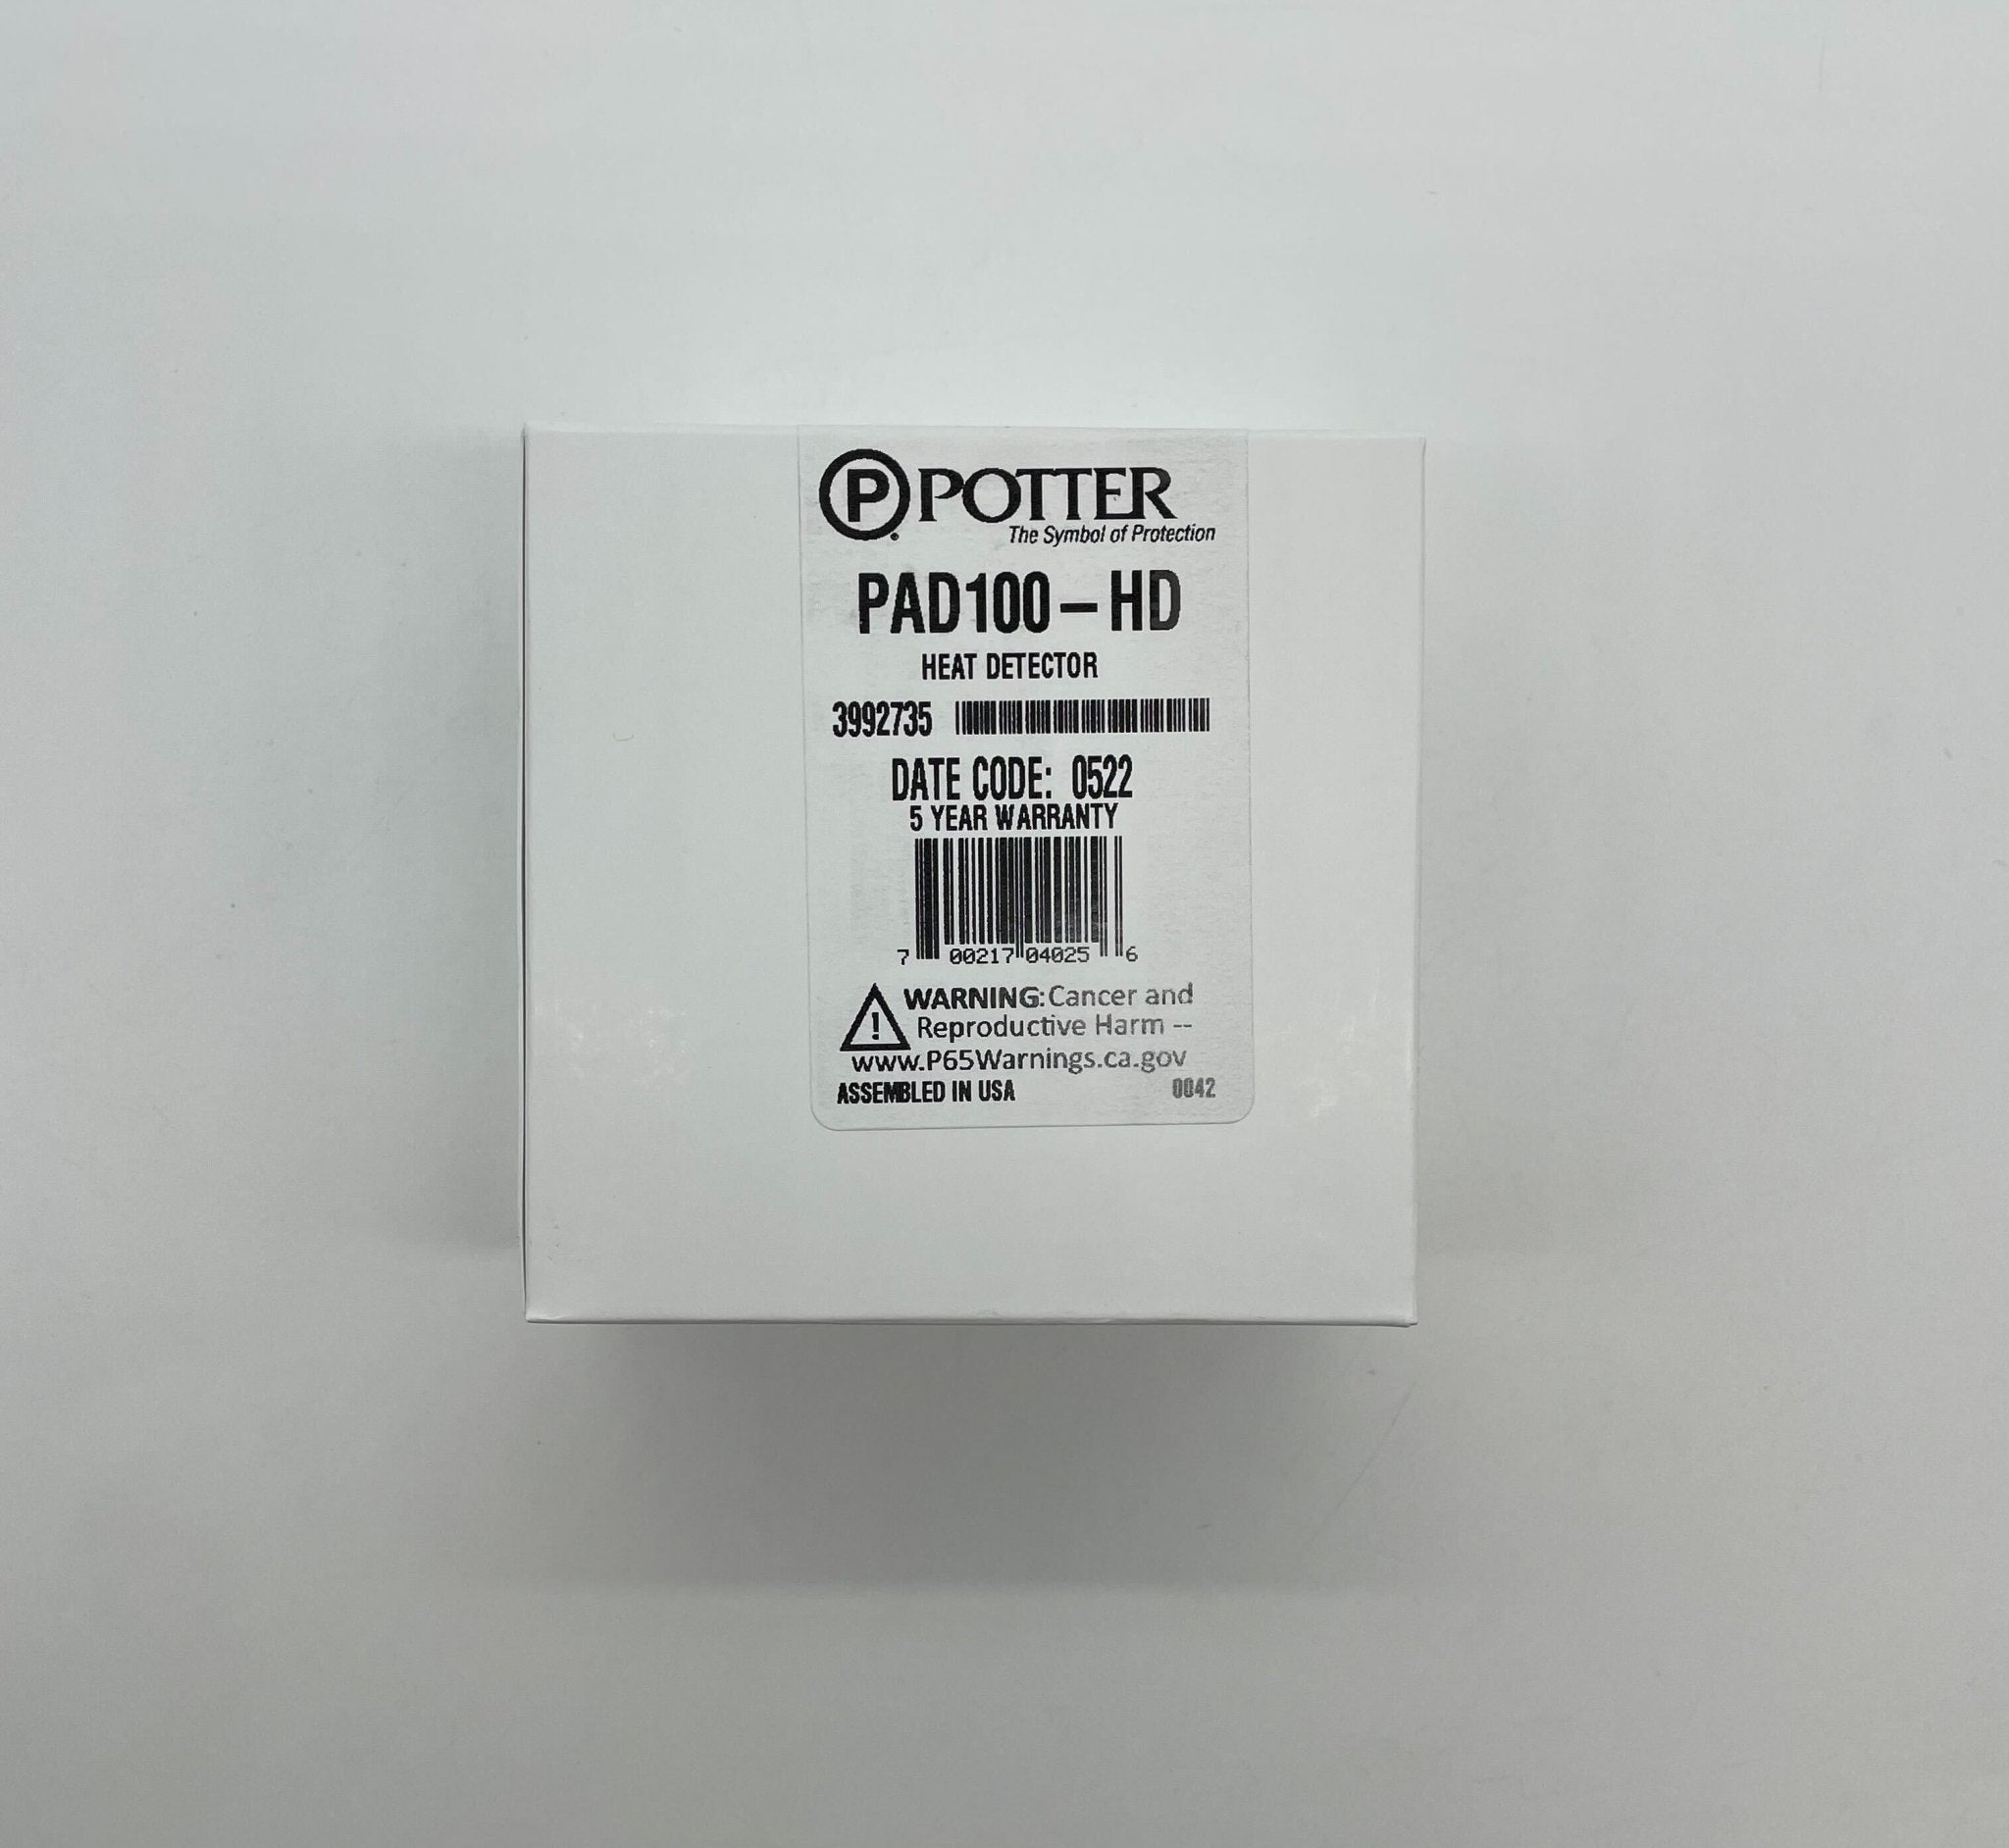 Potter PAD100-HD - The Fire Alarm Supplier